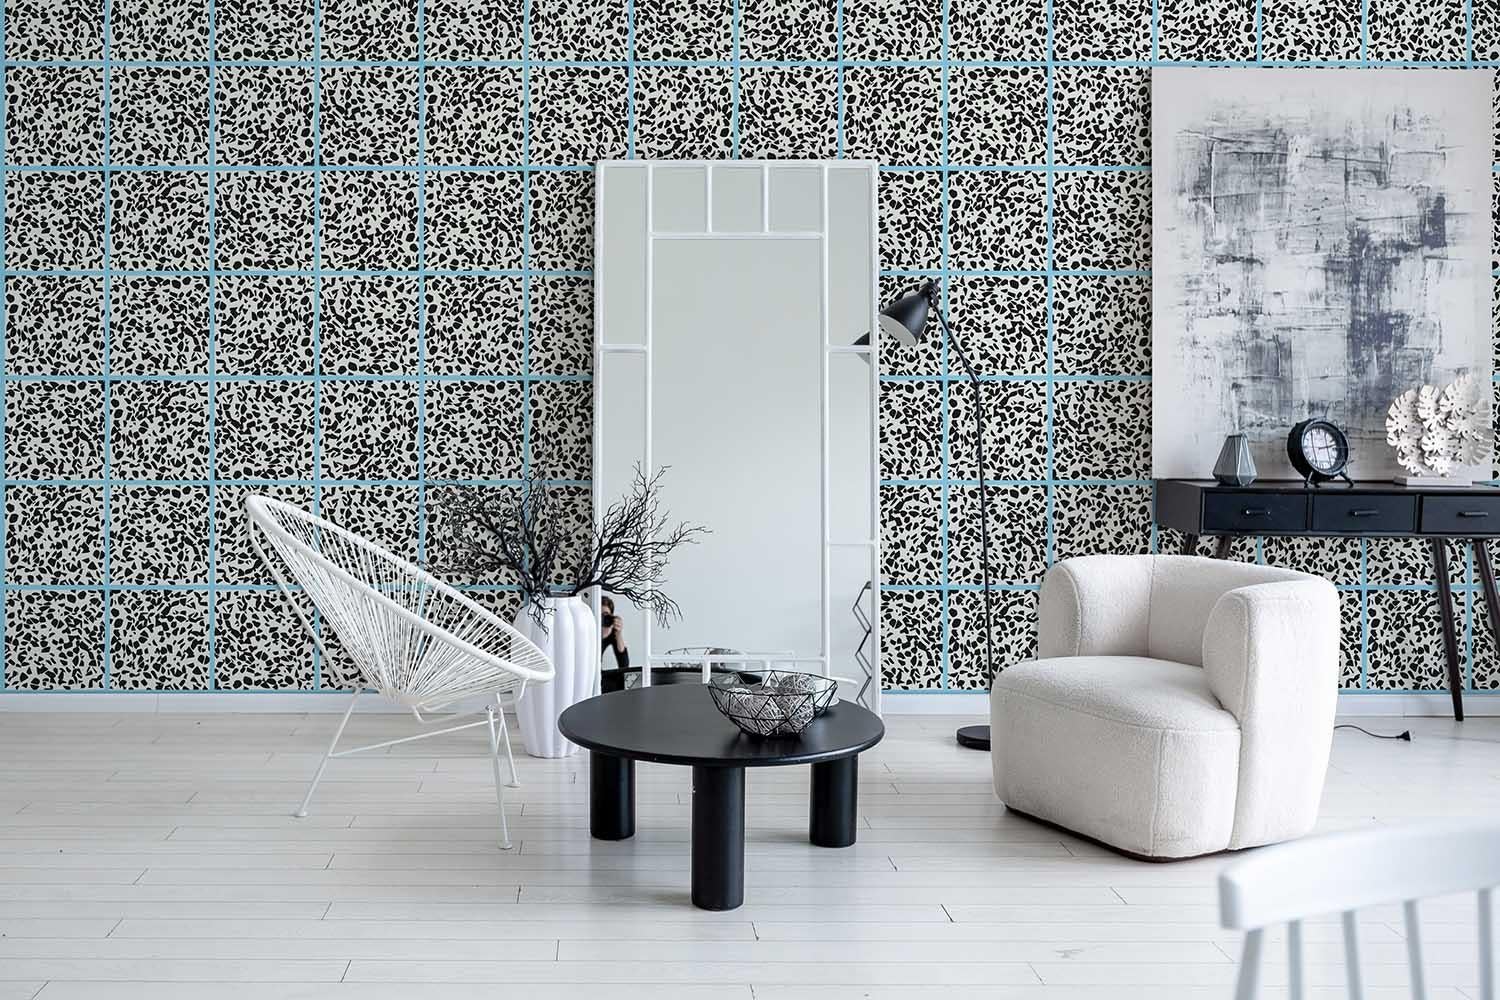 Fuga Blue Java, Wallpaper, Racconti Collection by Studio Lievito In New Condition For Sale In Firenze, IT